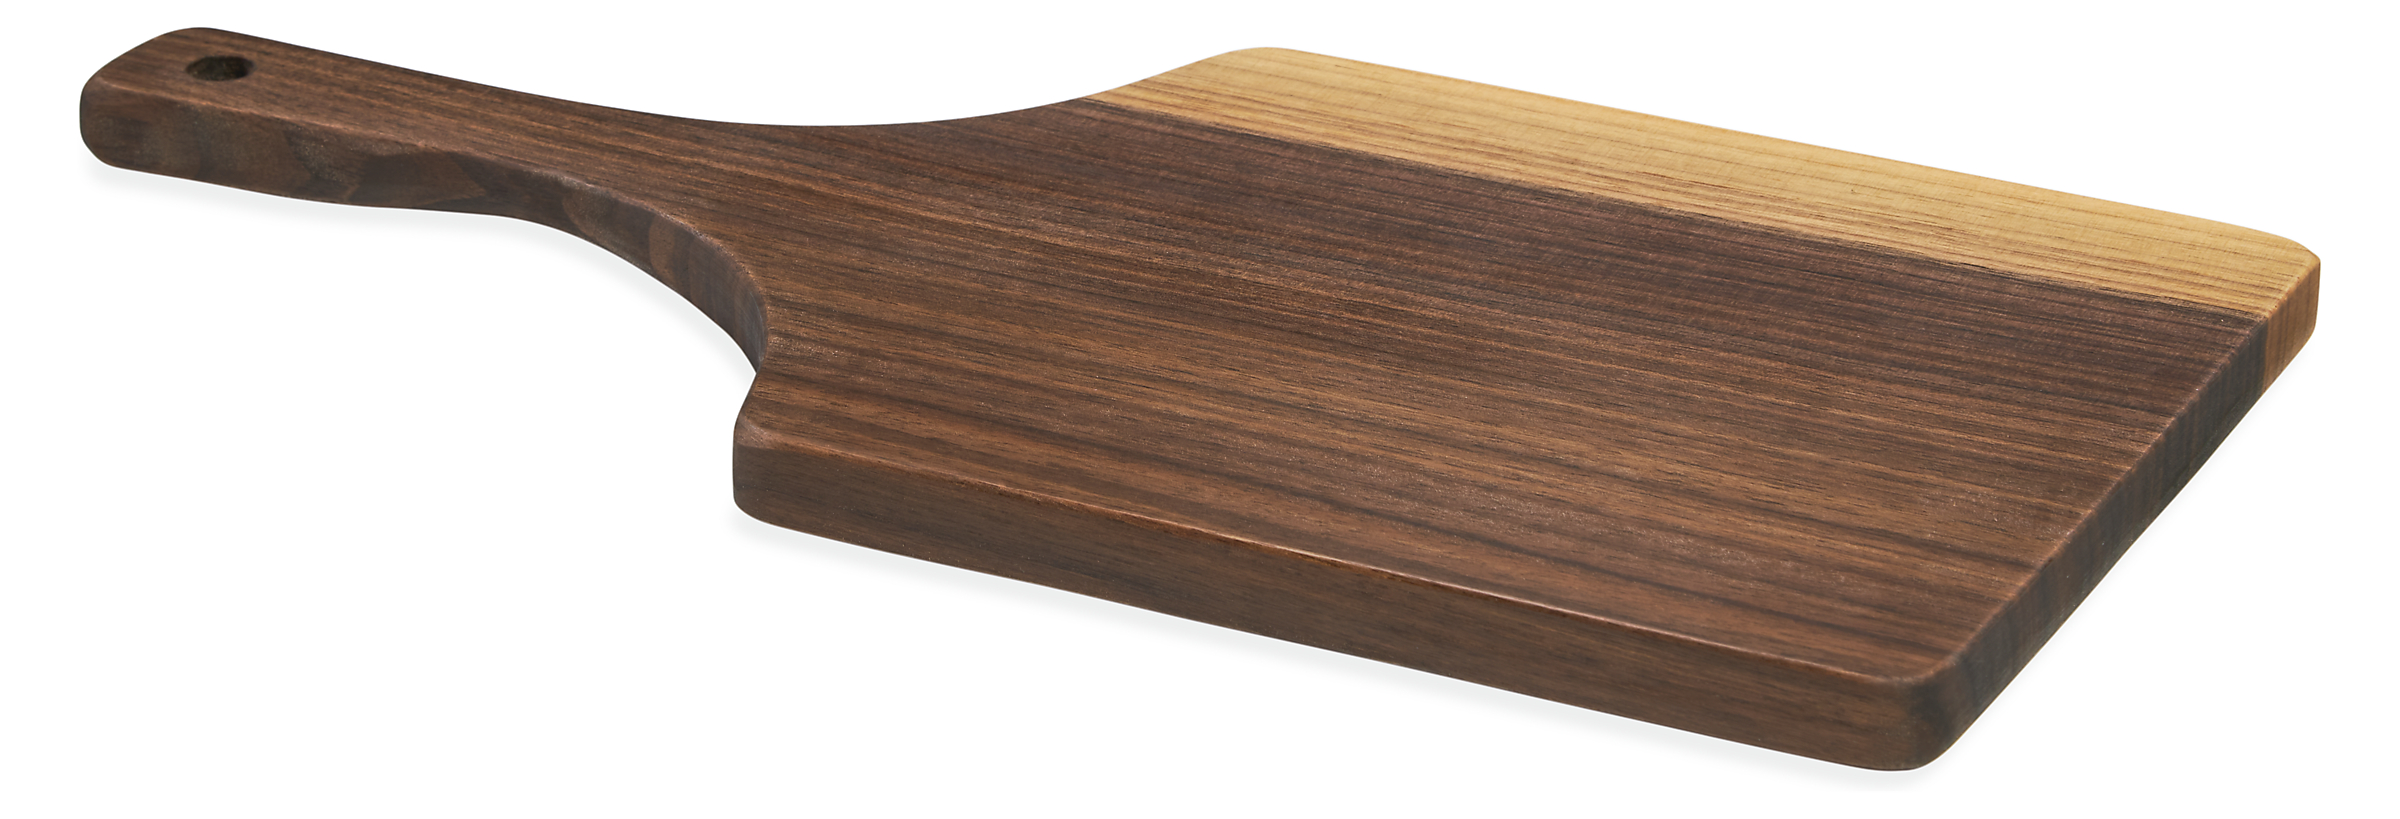 Beacon 16w 8d Serving Board with Handle